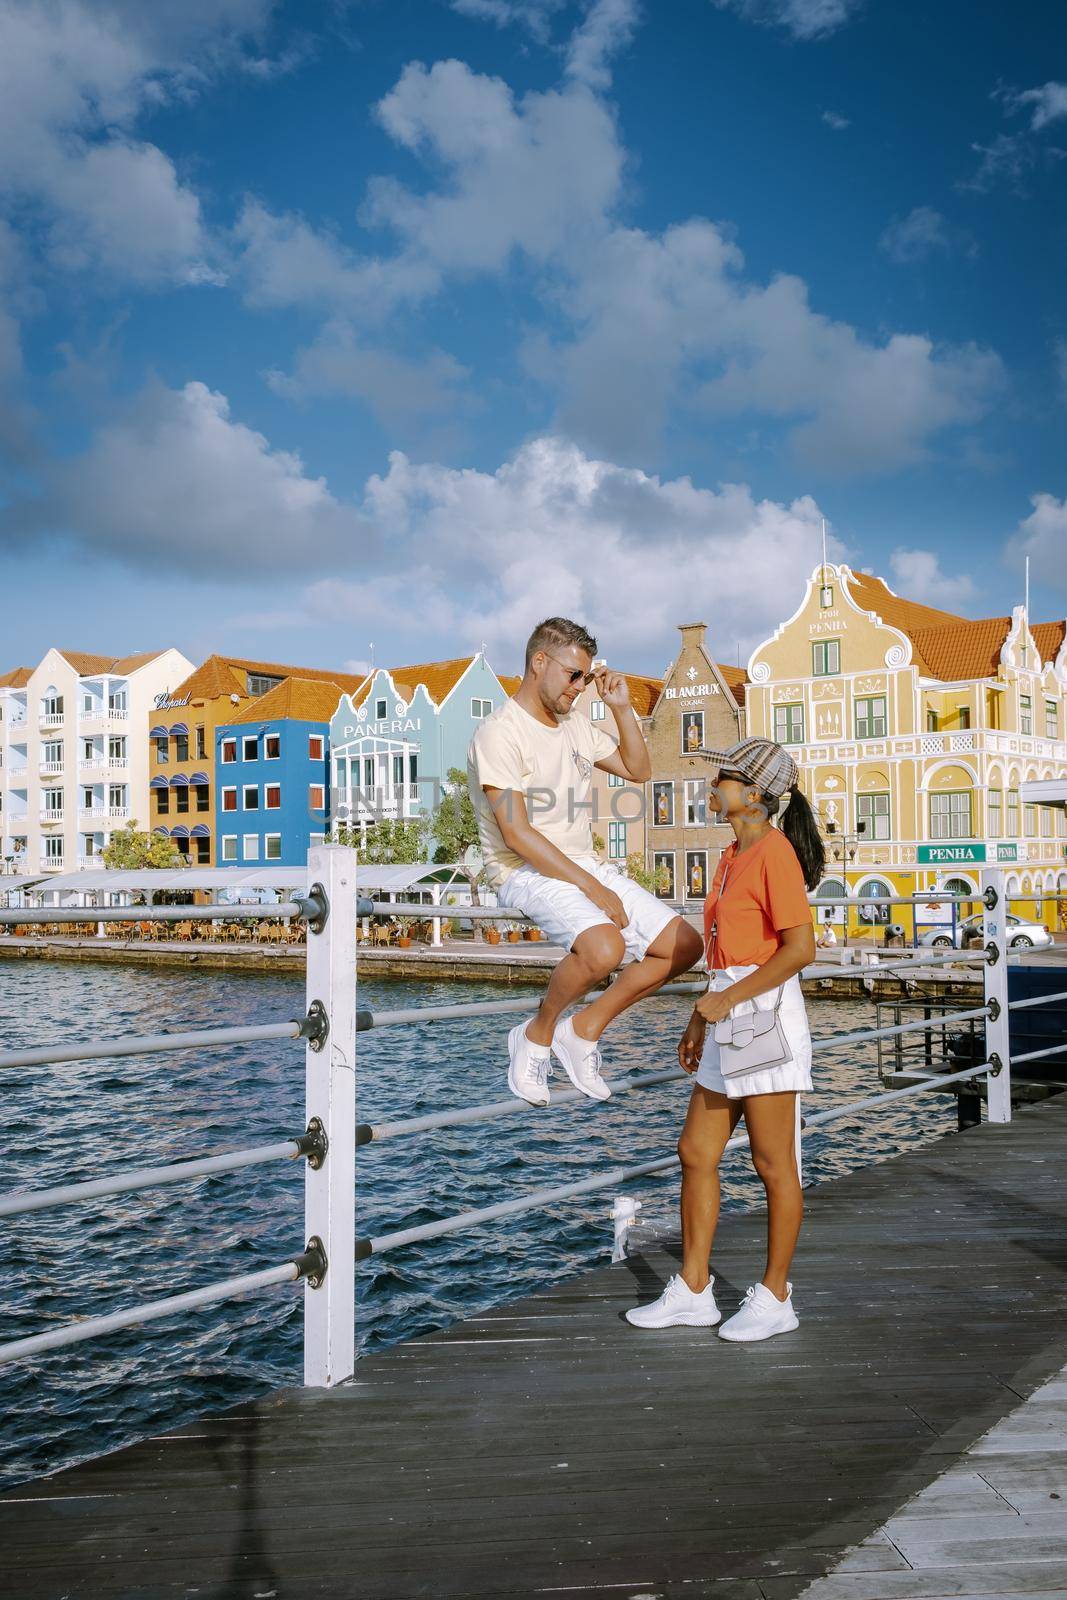 Willemstad, Curacao. Dutch Antilles. Colourful Buildings attracting tourists from all over the world. Blue sky sunny day Curacao by fokkebok